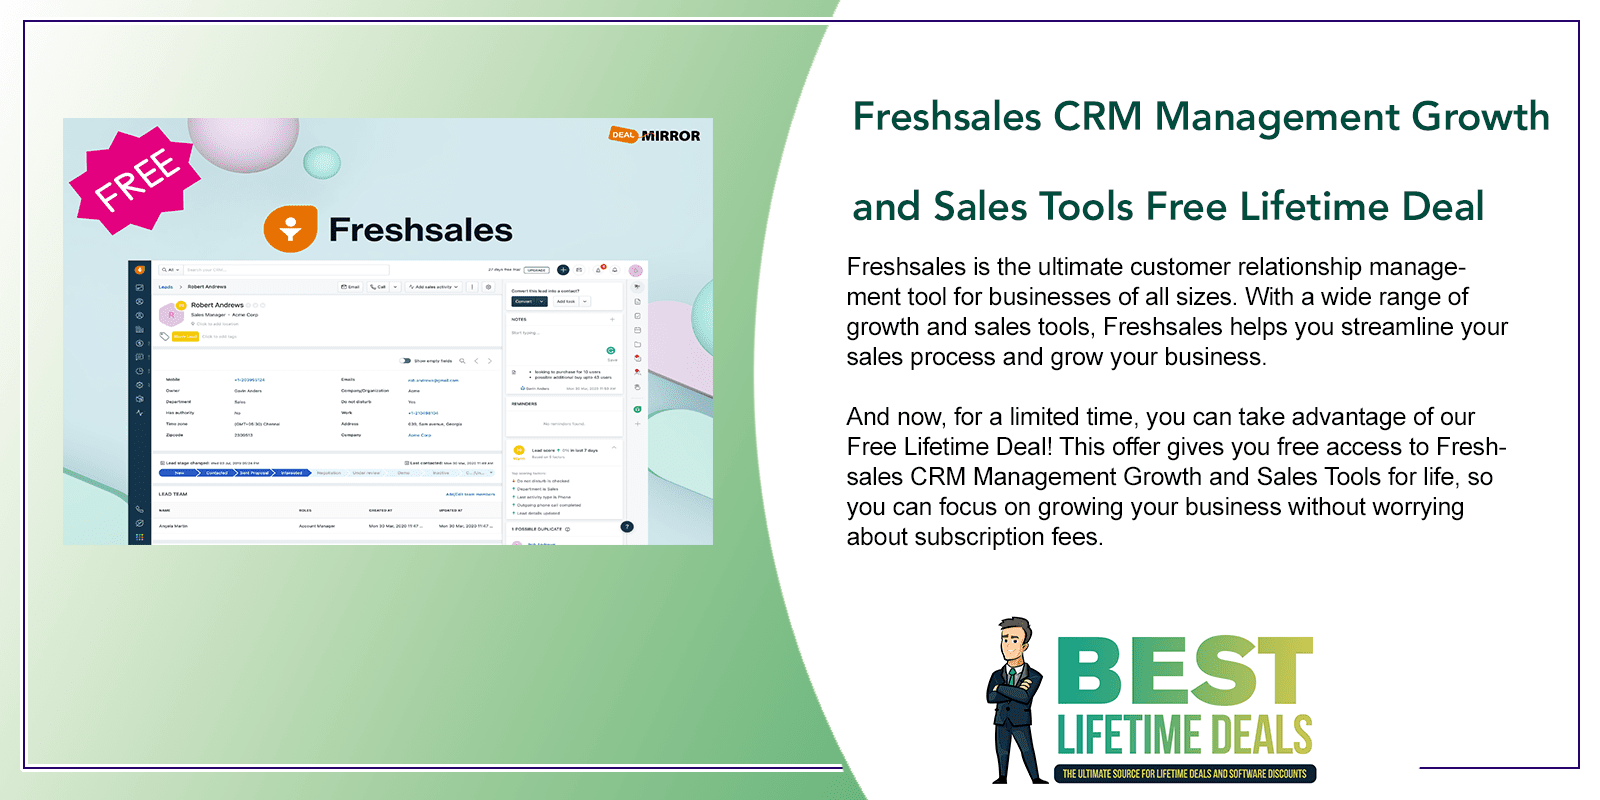 Freshsales CRM Management Growth Featured Image